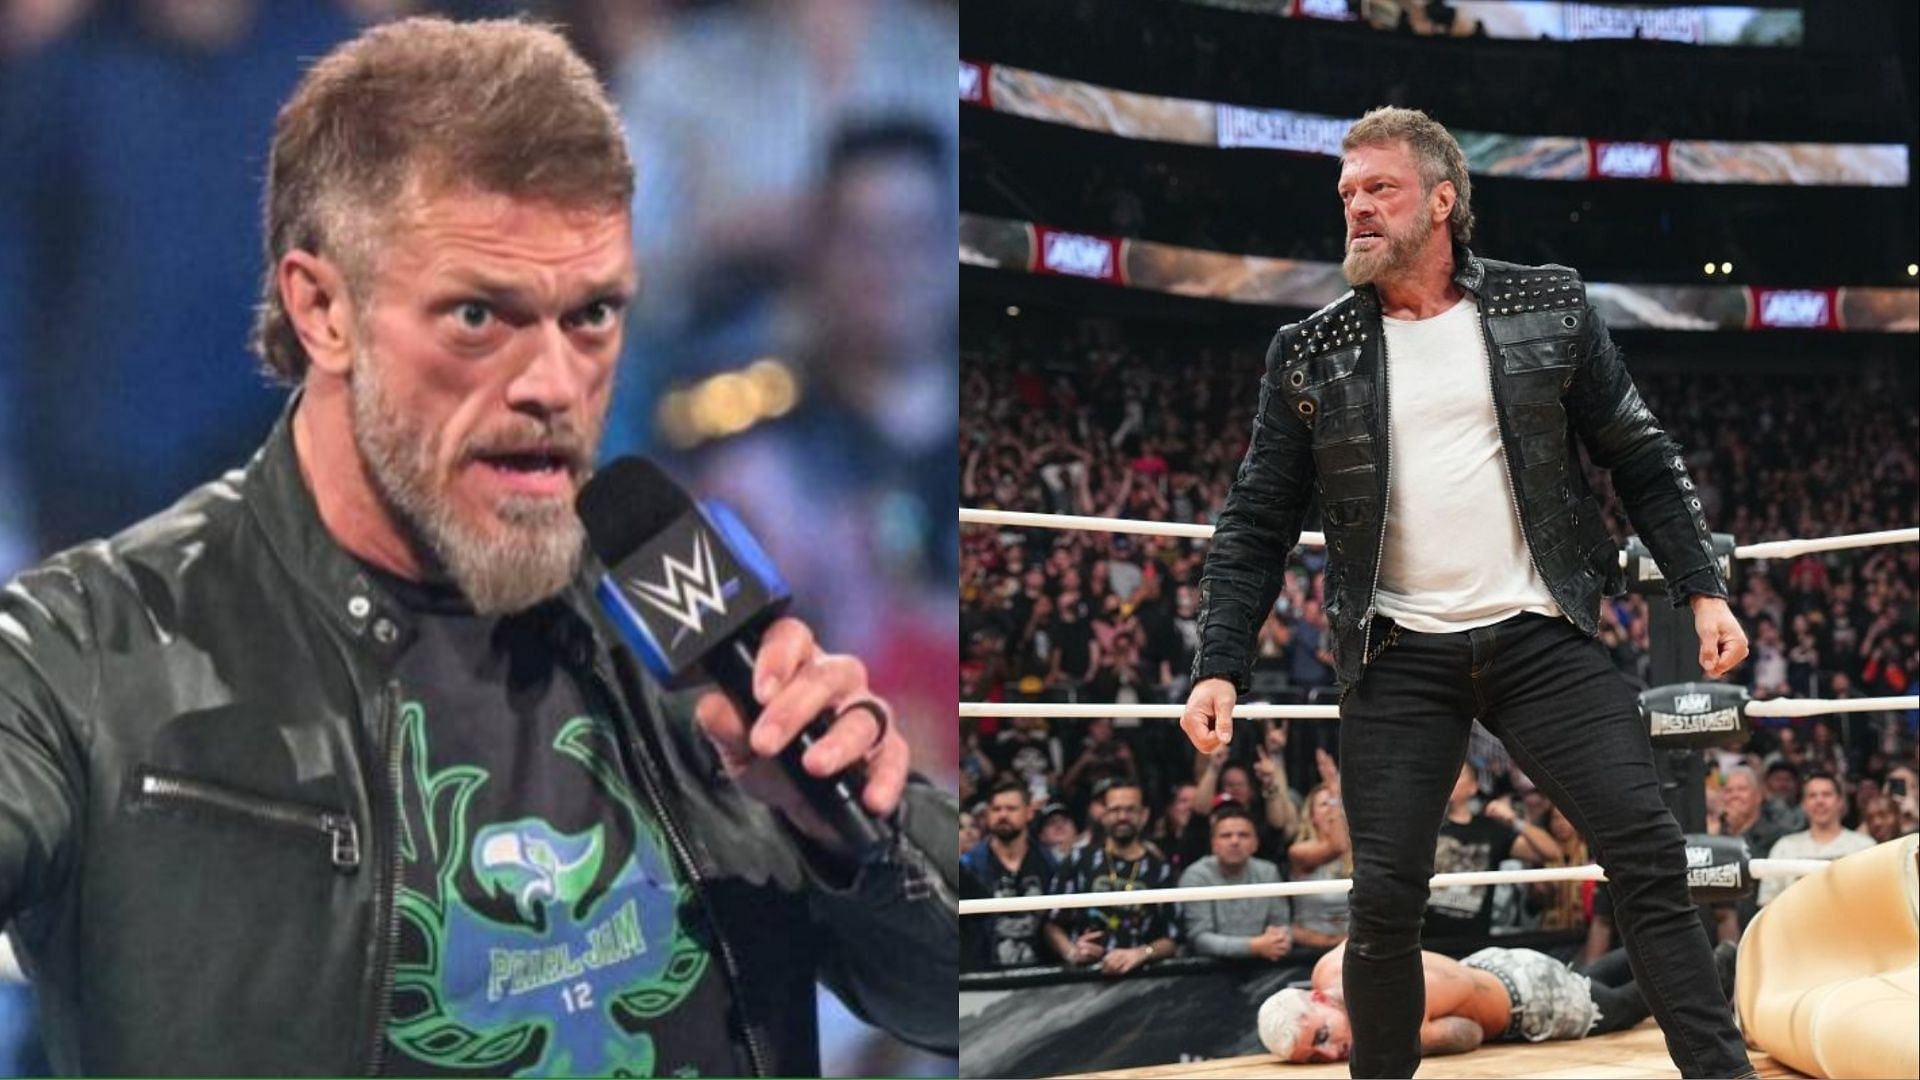 Edge made his AEW debut at WrestleDream.